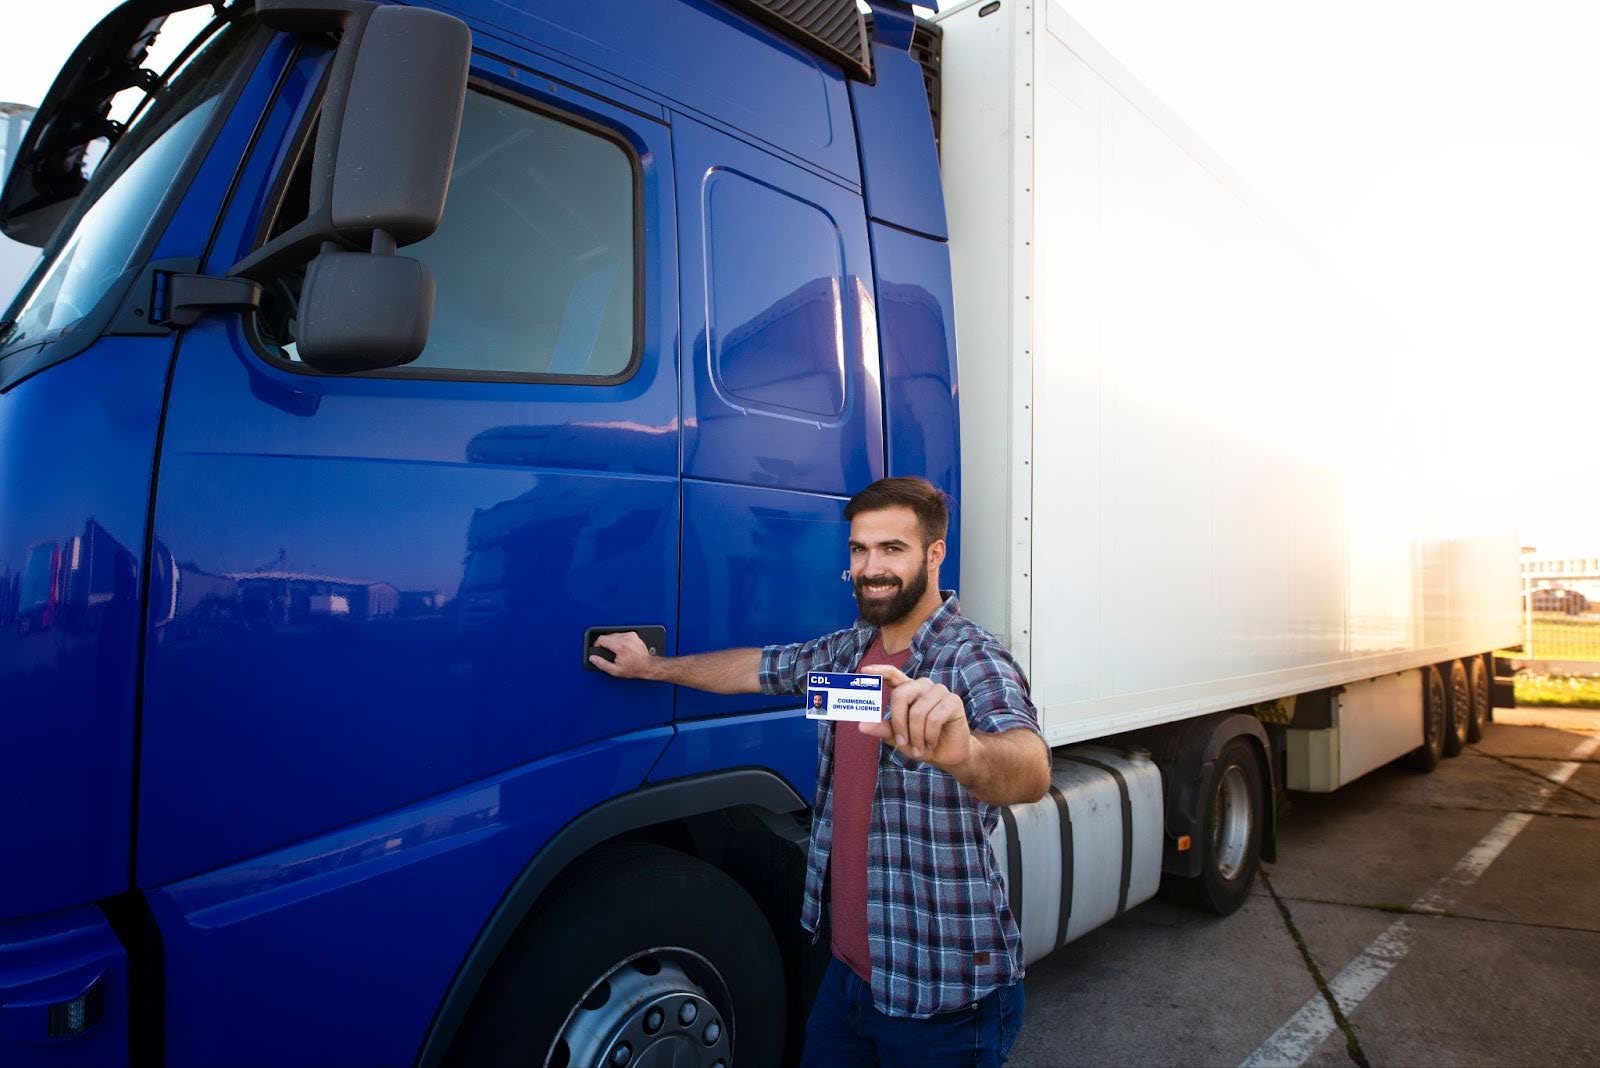 A man with his newly-acquired CDL license in front of a blue truck.